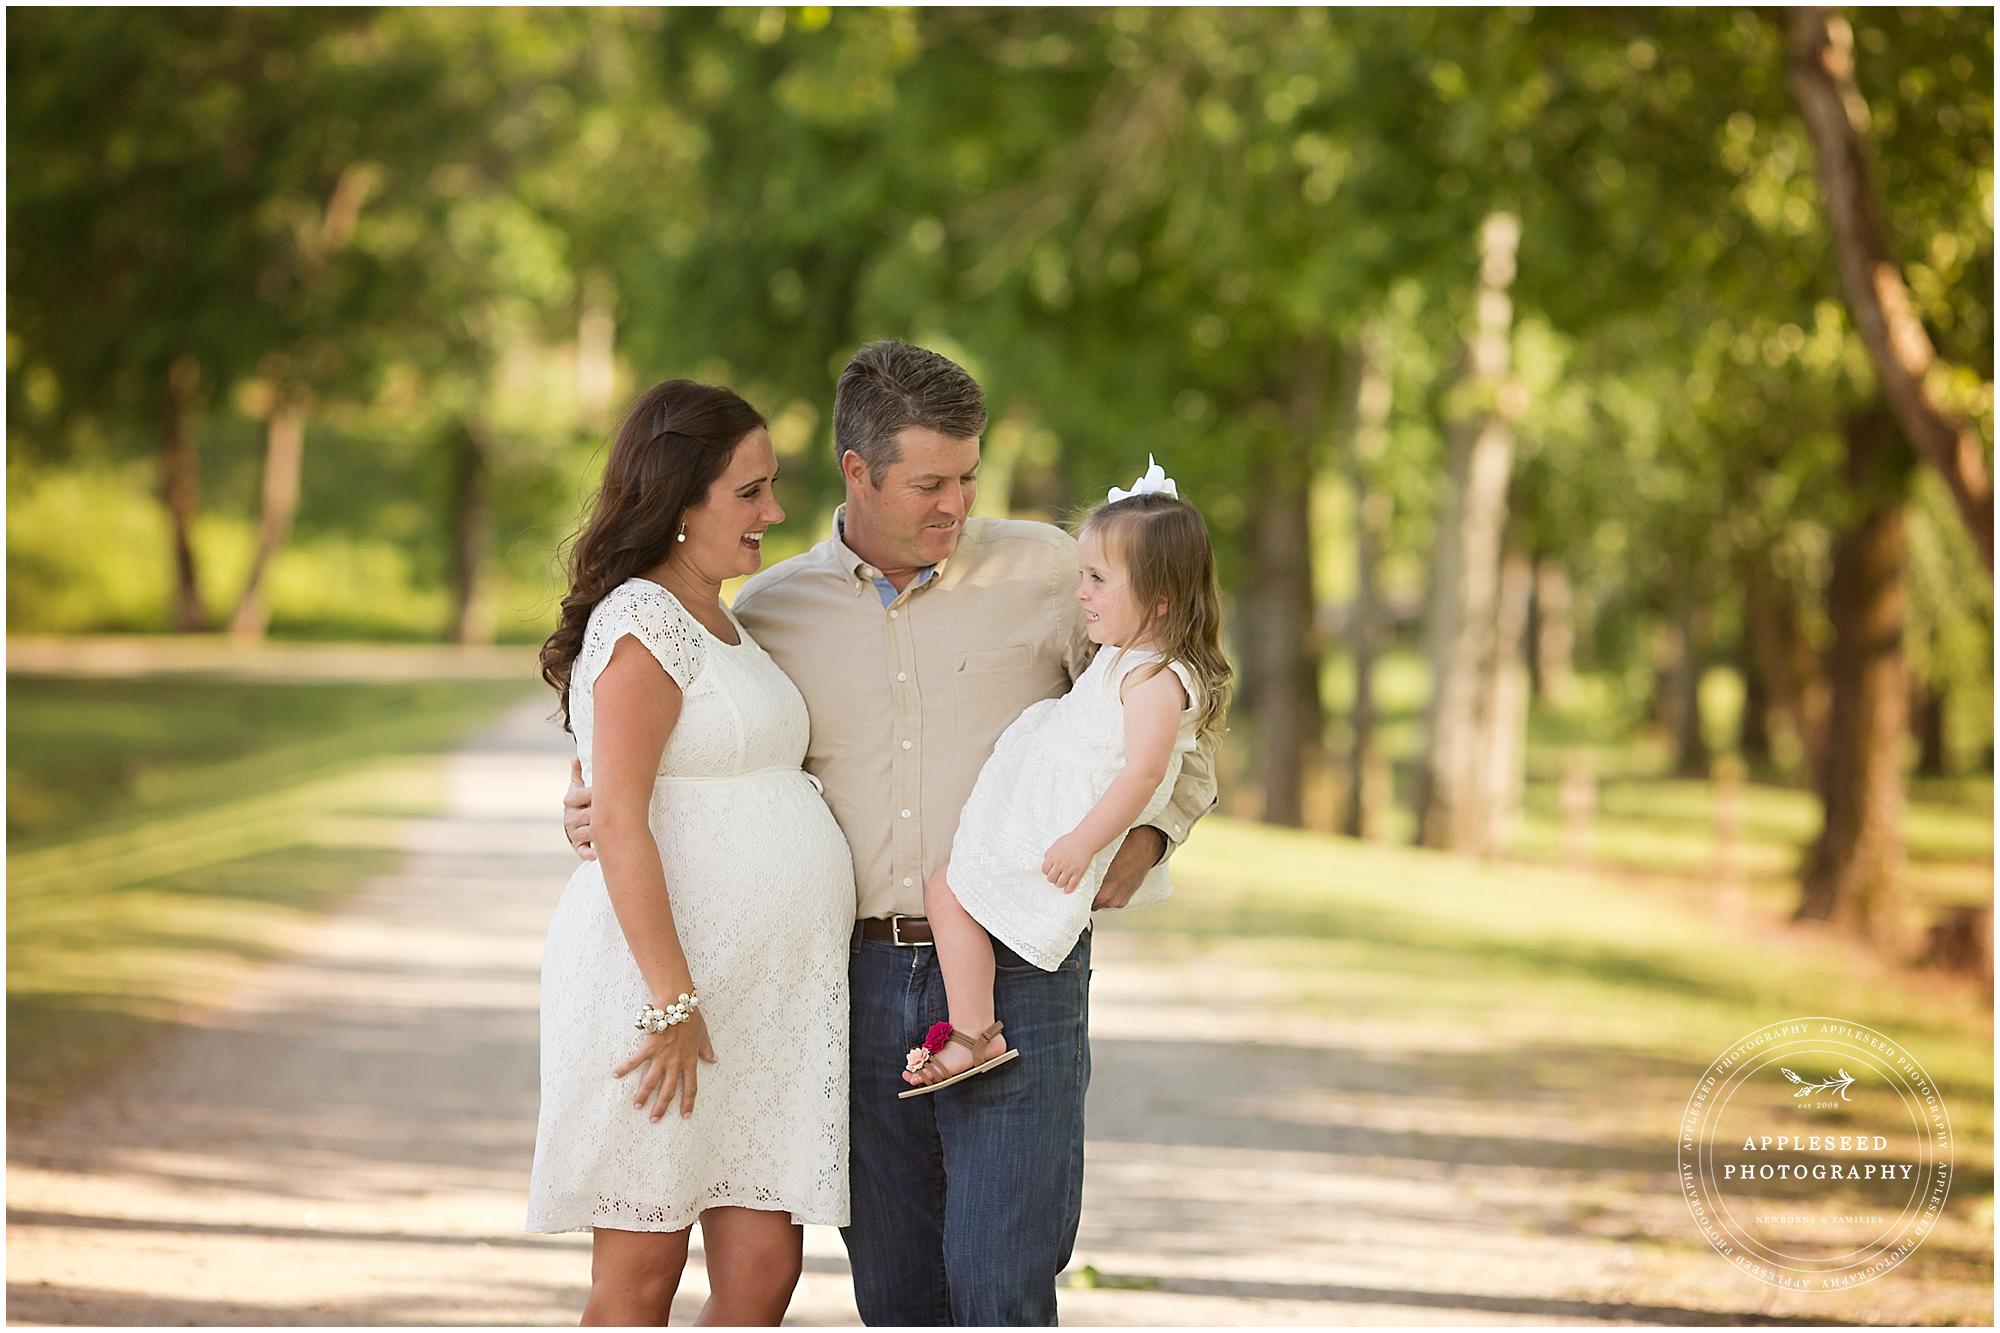 Atlanta Maternity Photographer | Outdoor Maternity Session | Appleseed Photography